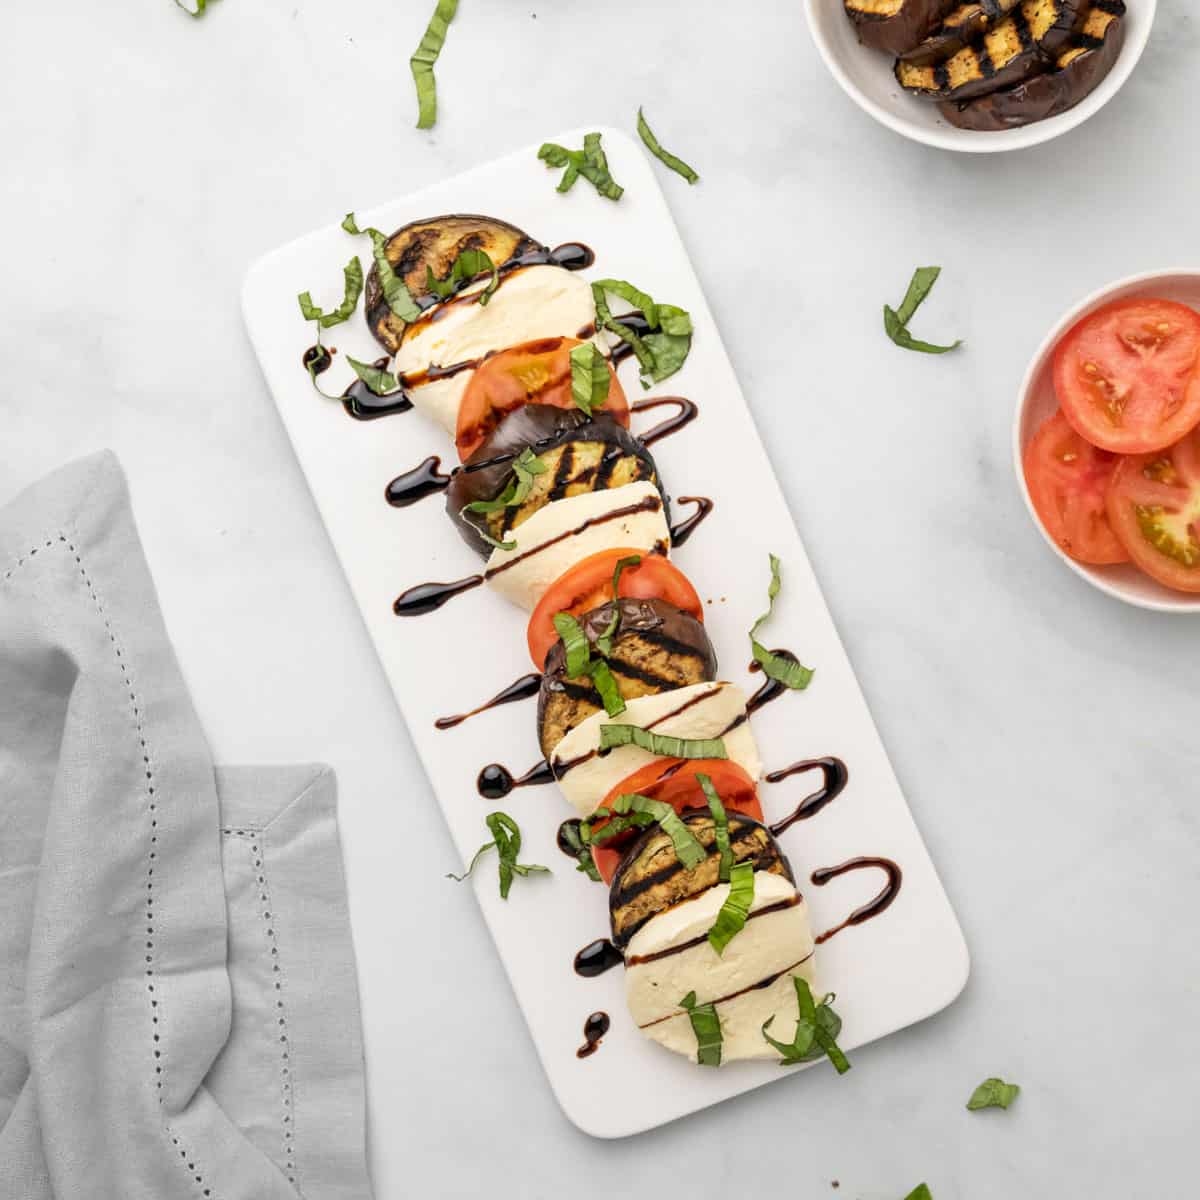 Caprese salad with eggplant on a white serving dish, as seen from above